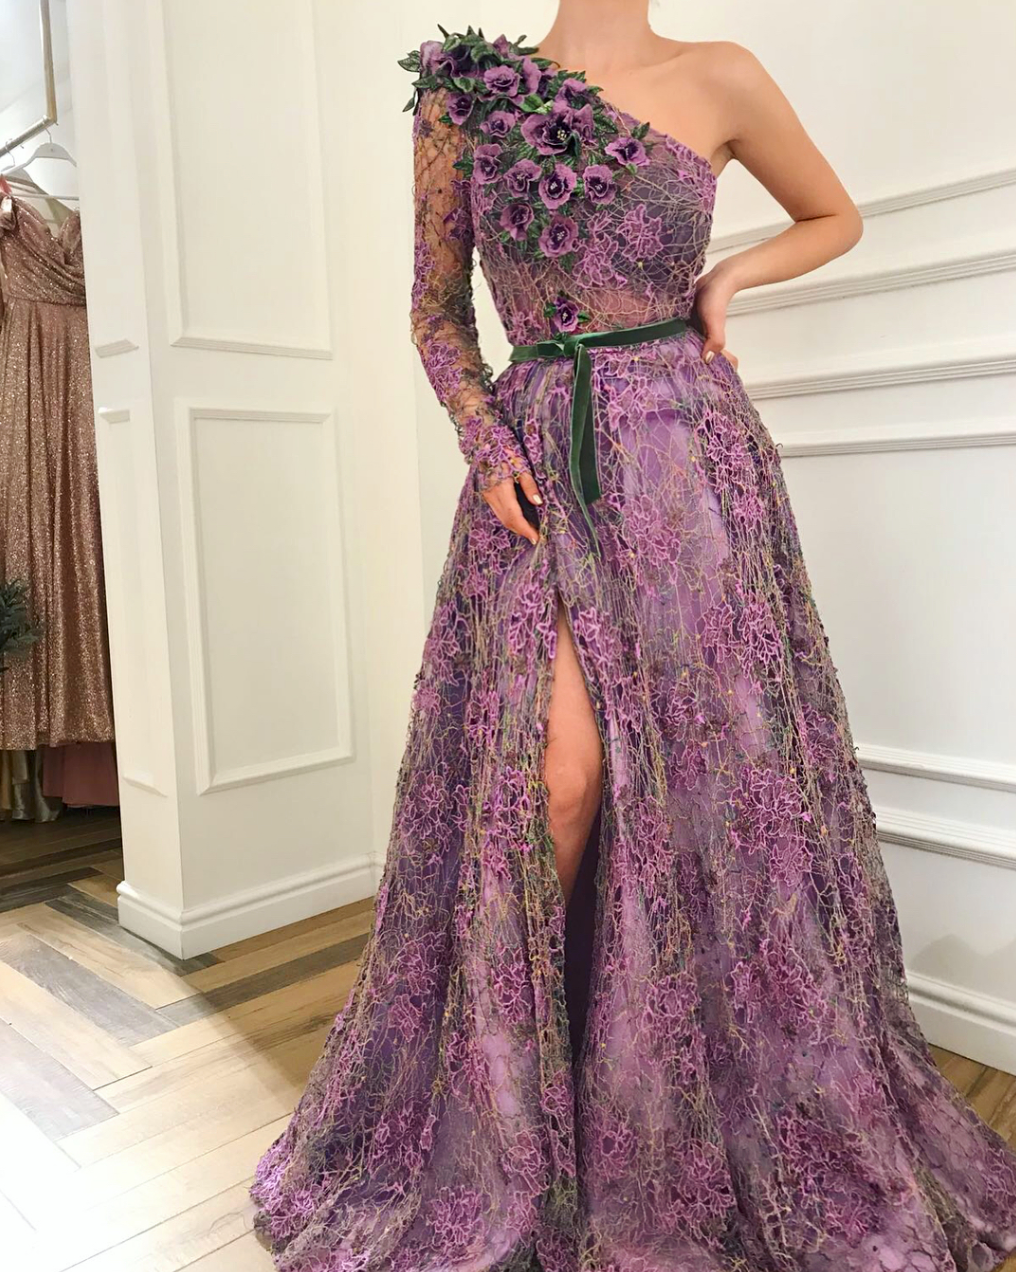 Purple A-Line dress with one long sleeve and embroidery